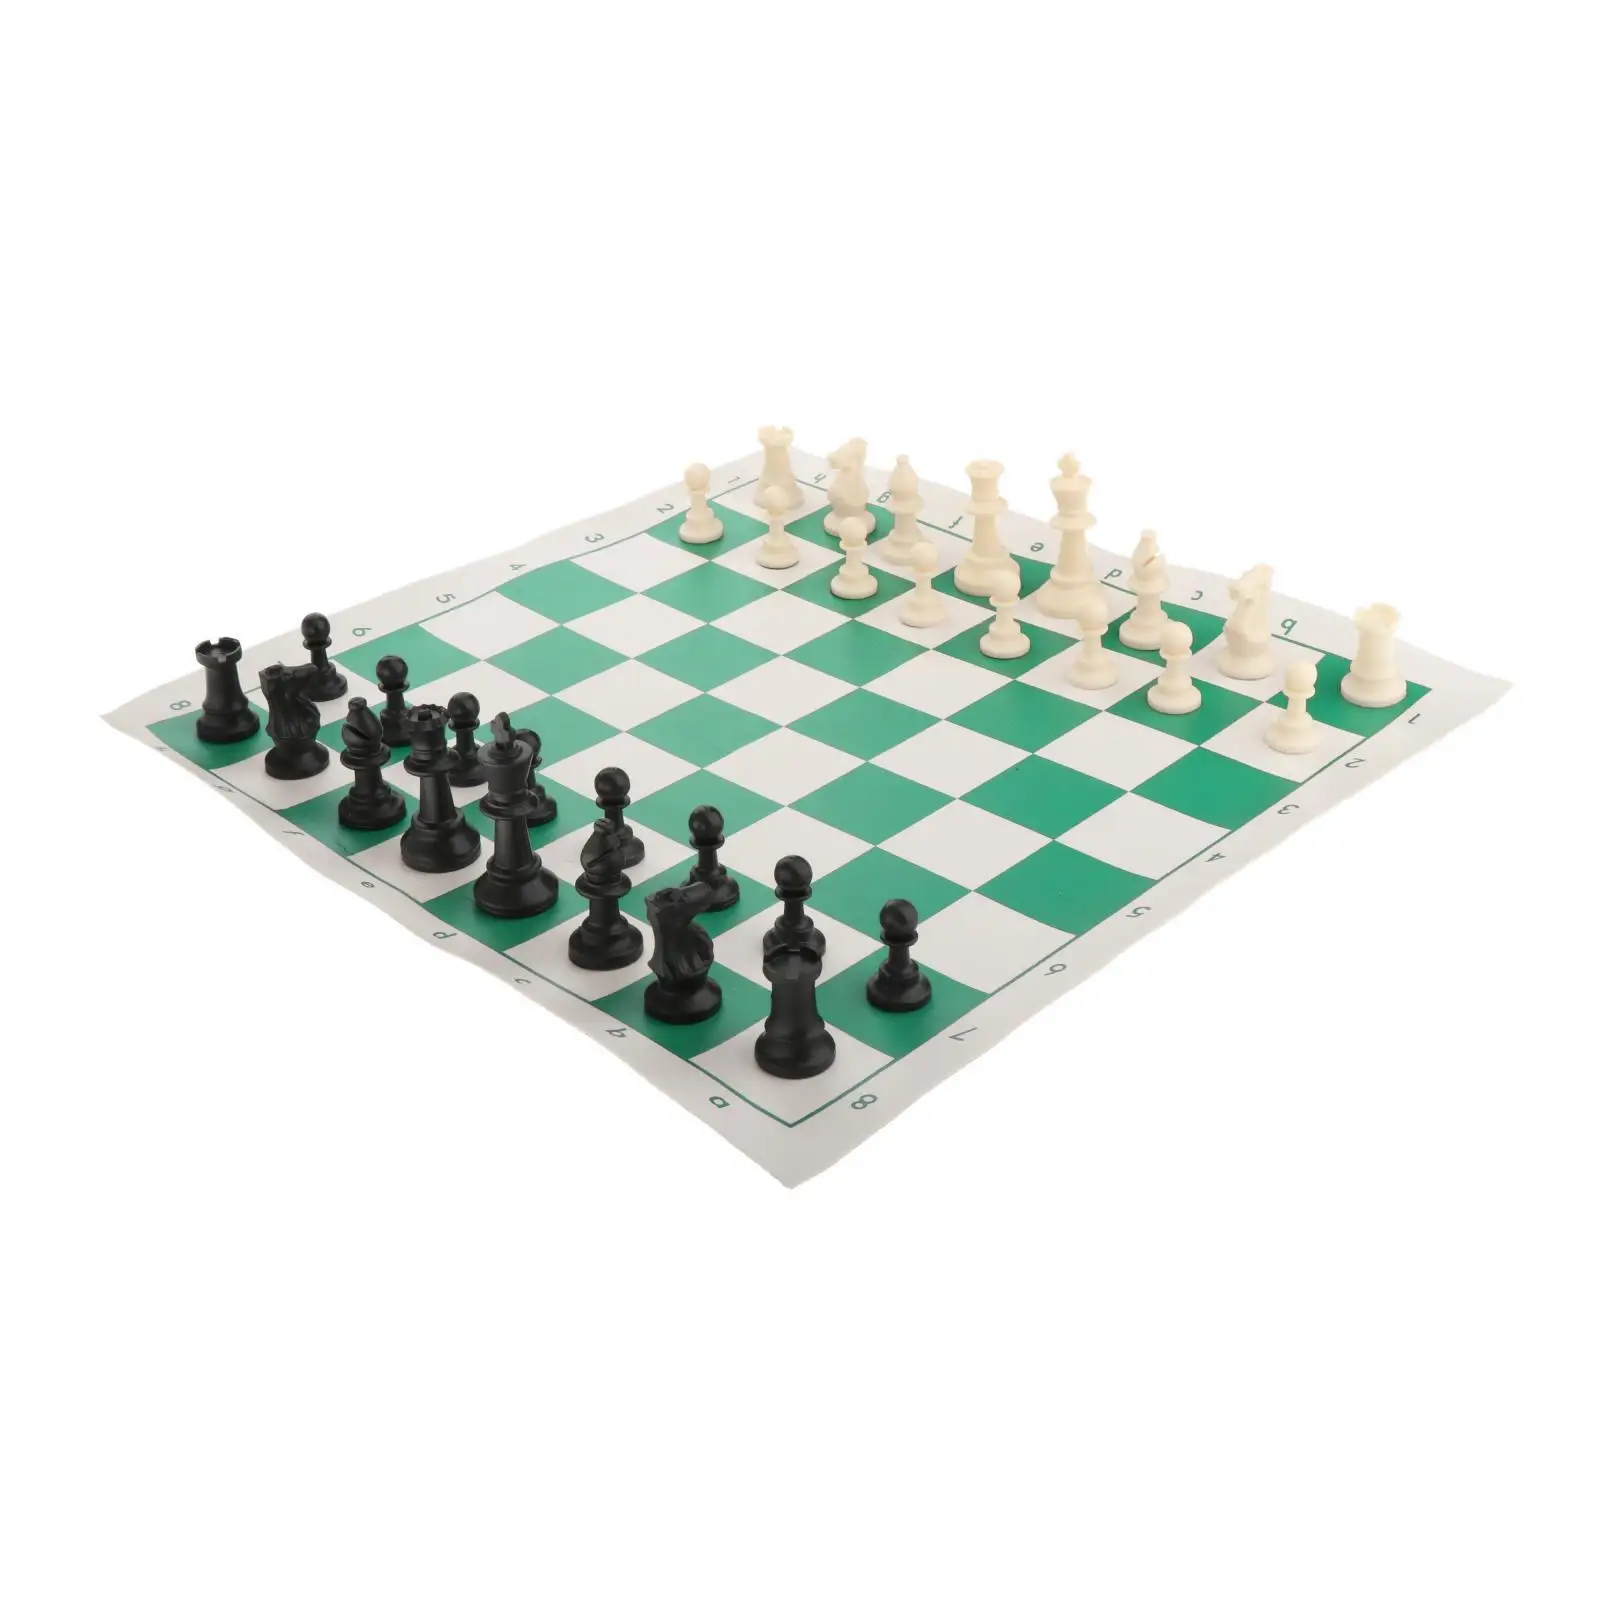 Travel Portable Chess Set Board Games 15